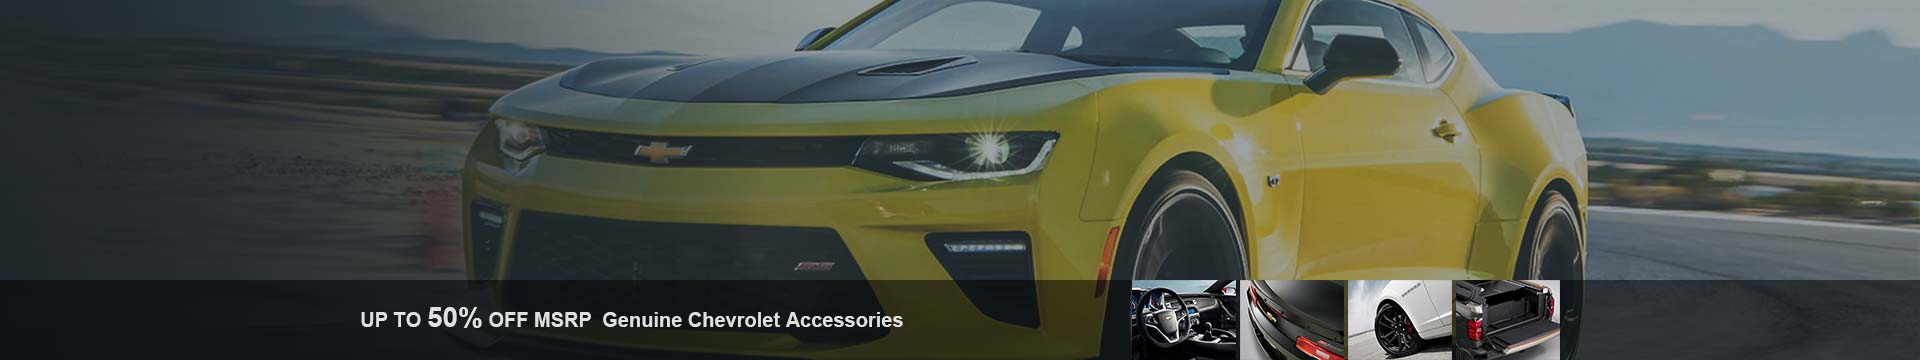 Shop Chevrolet SSR accessories with lowest prices